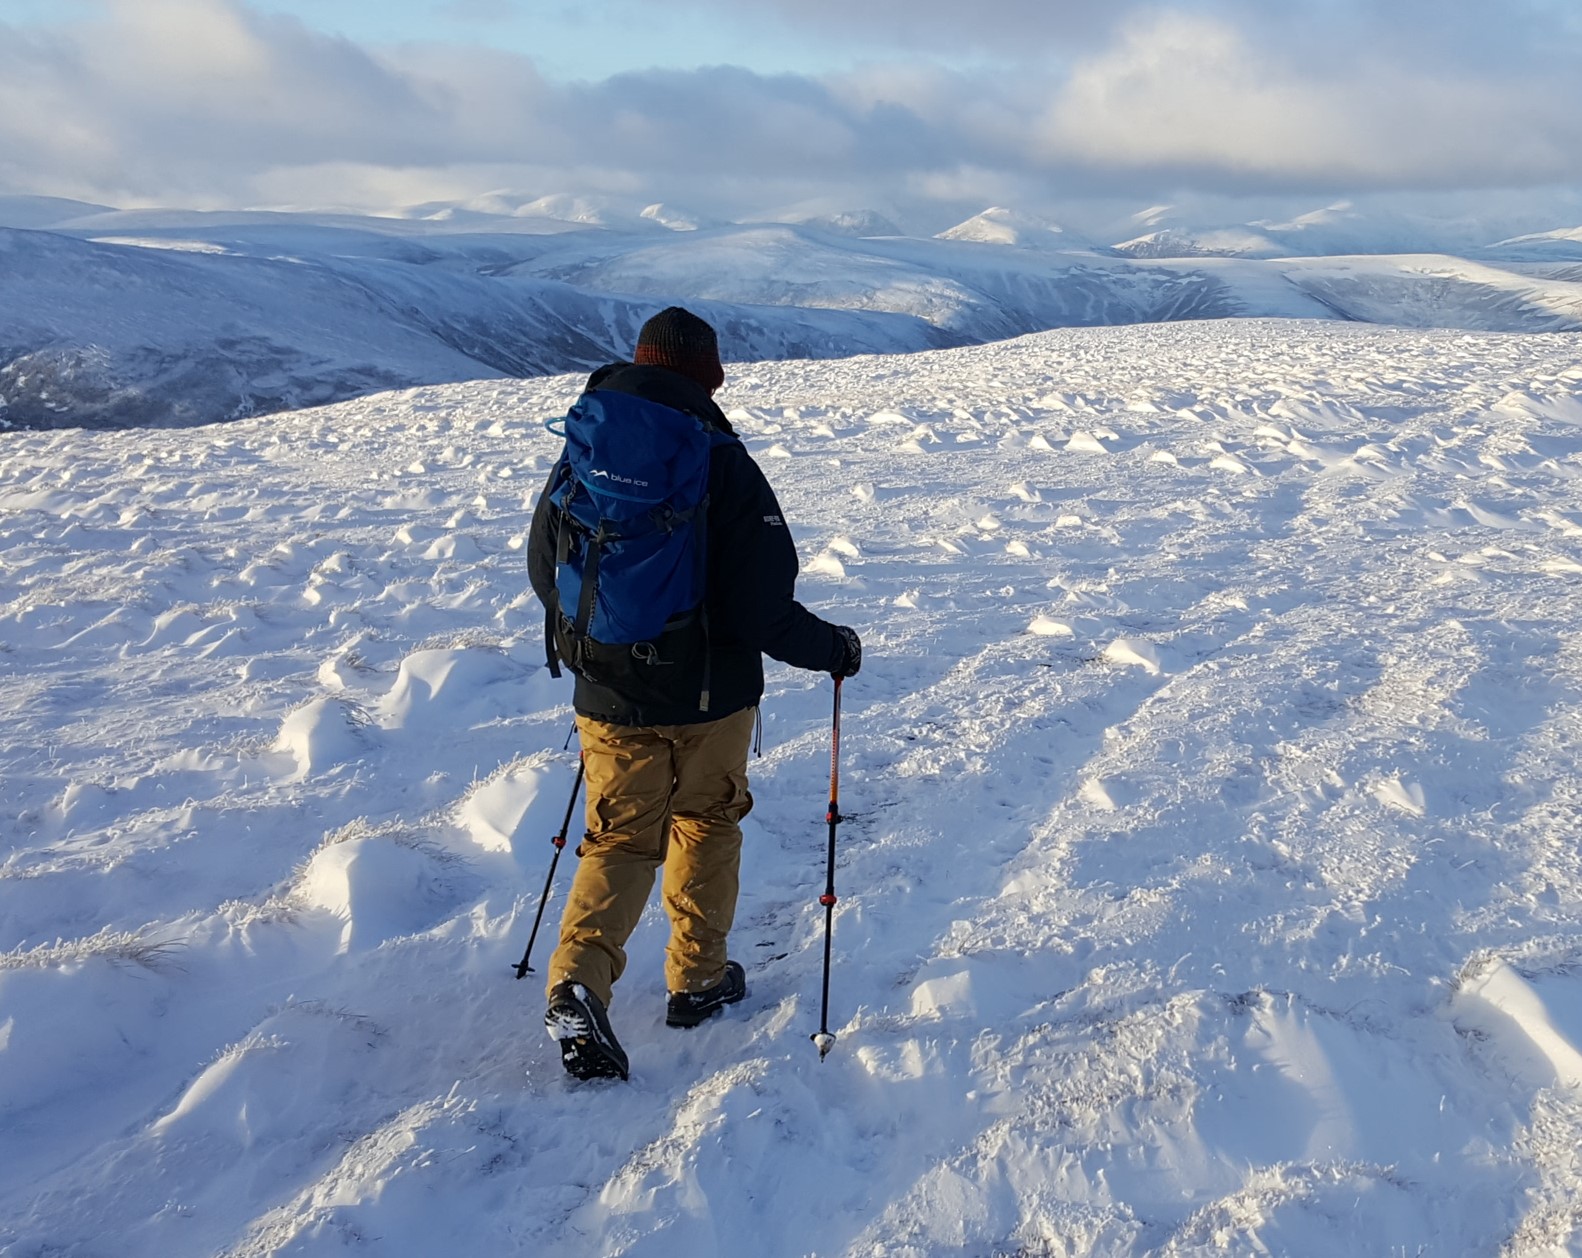 WINTER WALKING AND THE EXTRA DIFFICULTIES THAT THE SNOW CAN BRING